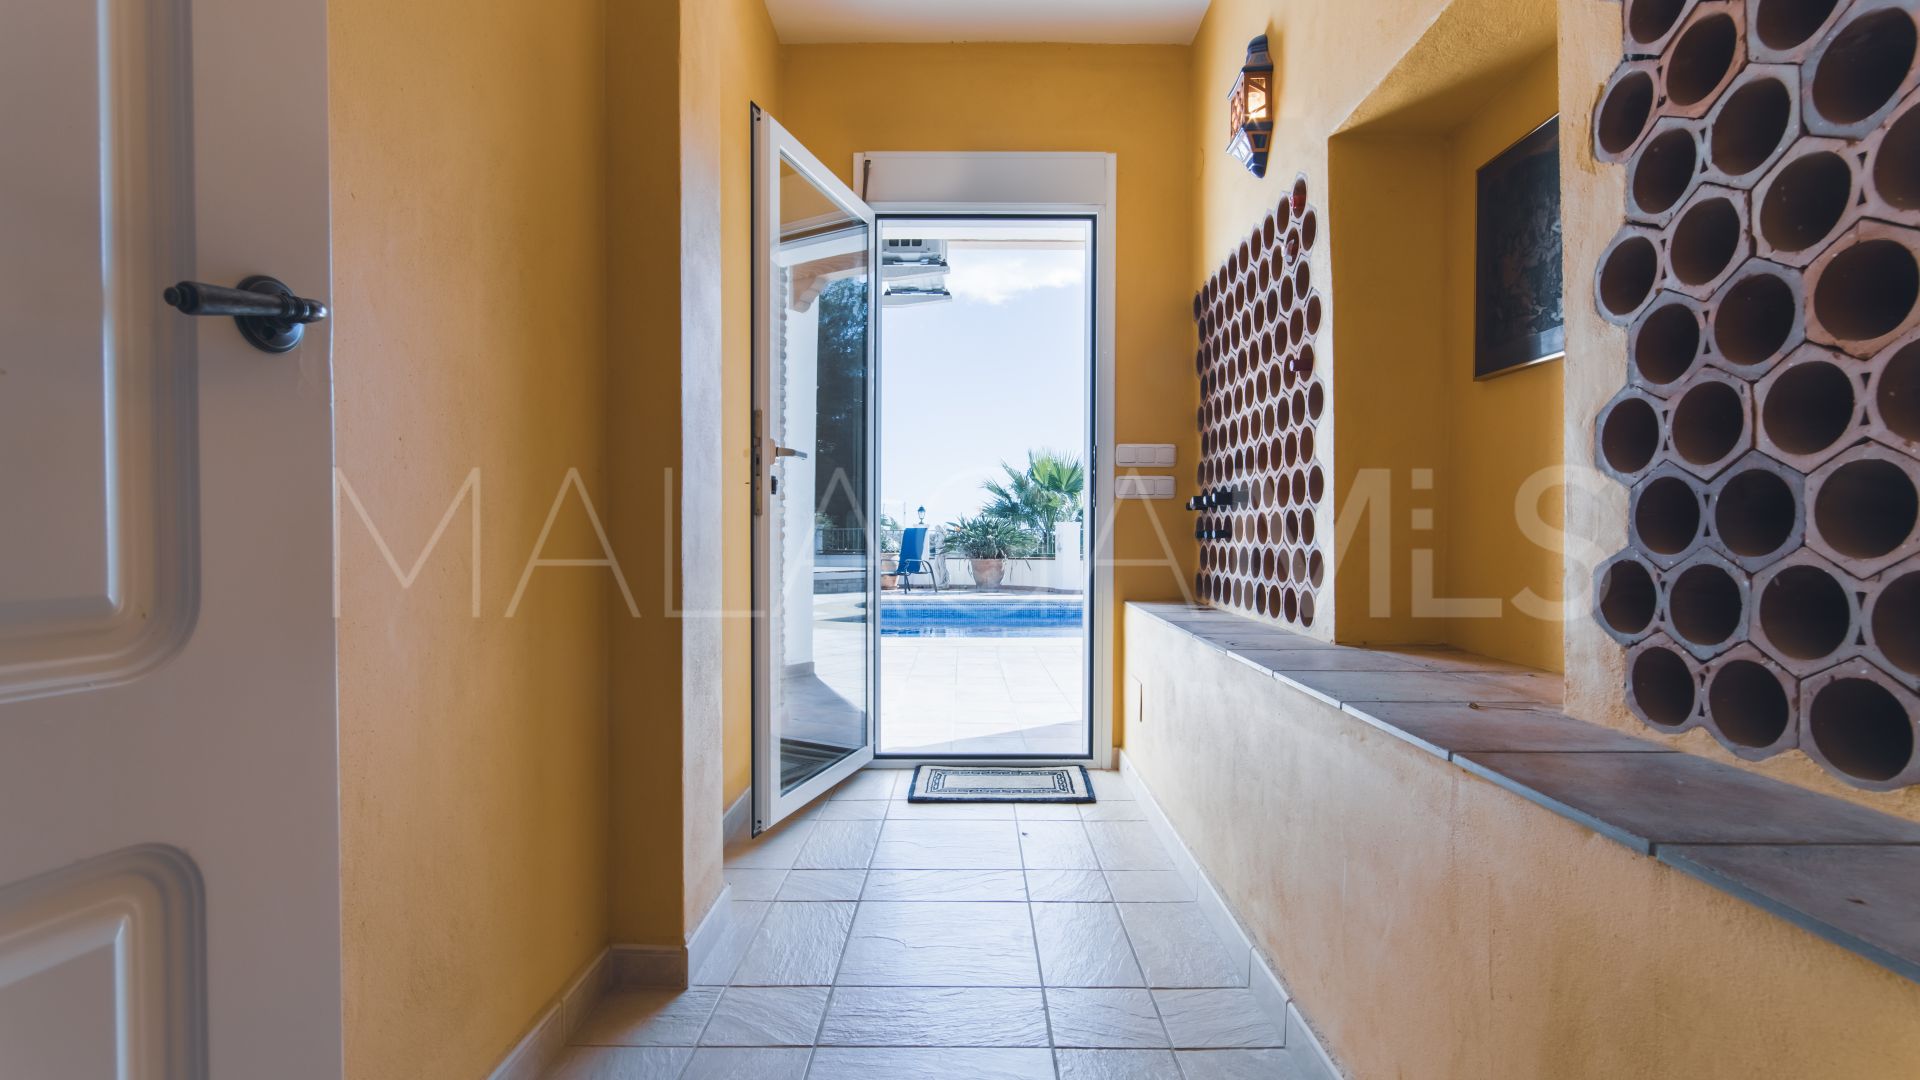 Casa for sale with 5 bedrooms in Frigiliana